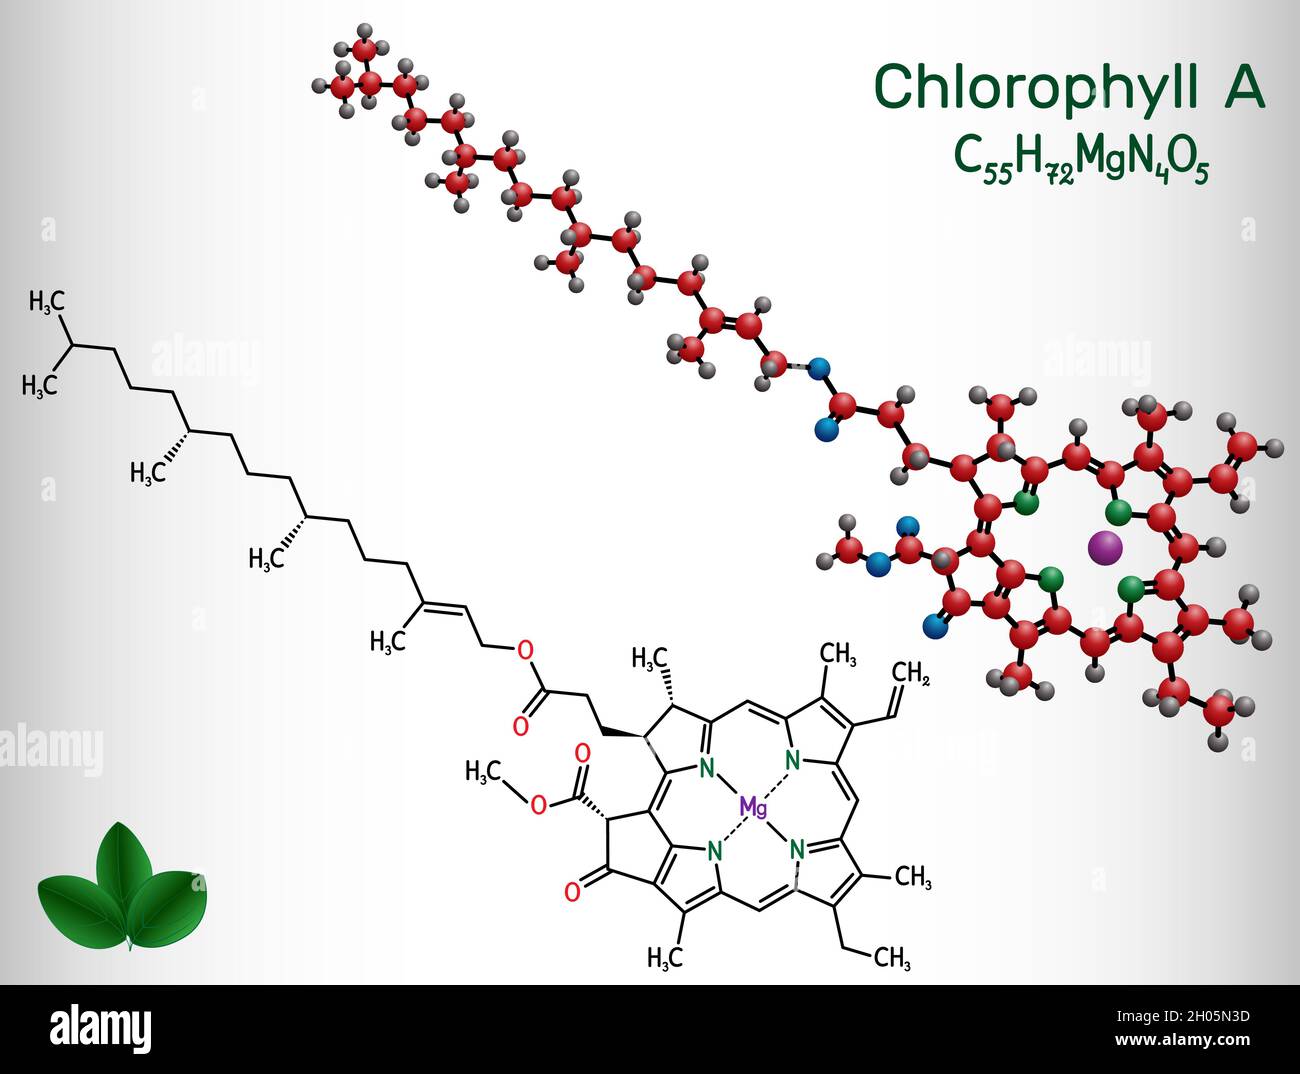 Chlorophyll A, chlorophyll molecule. It is photosynthetic pigment used in oxygenic photosynthesis. Structural chemical formula and molecule model. Vec Stock Vector